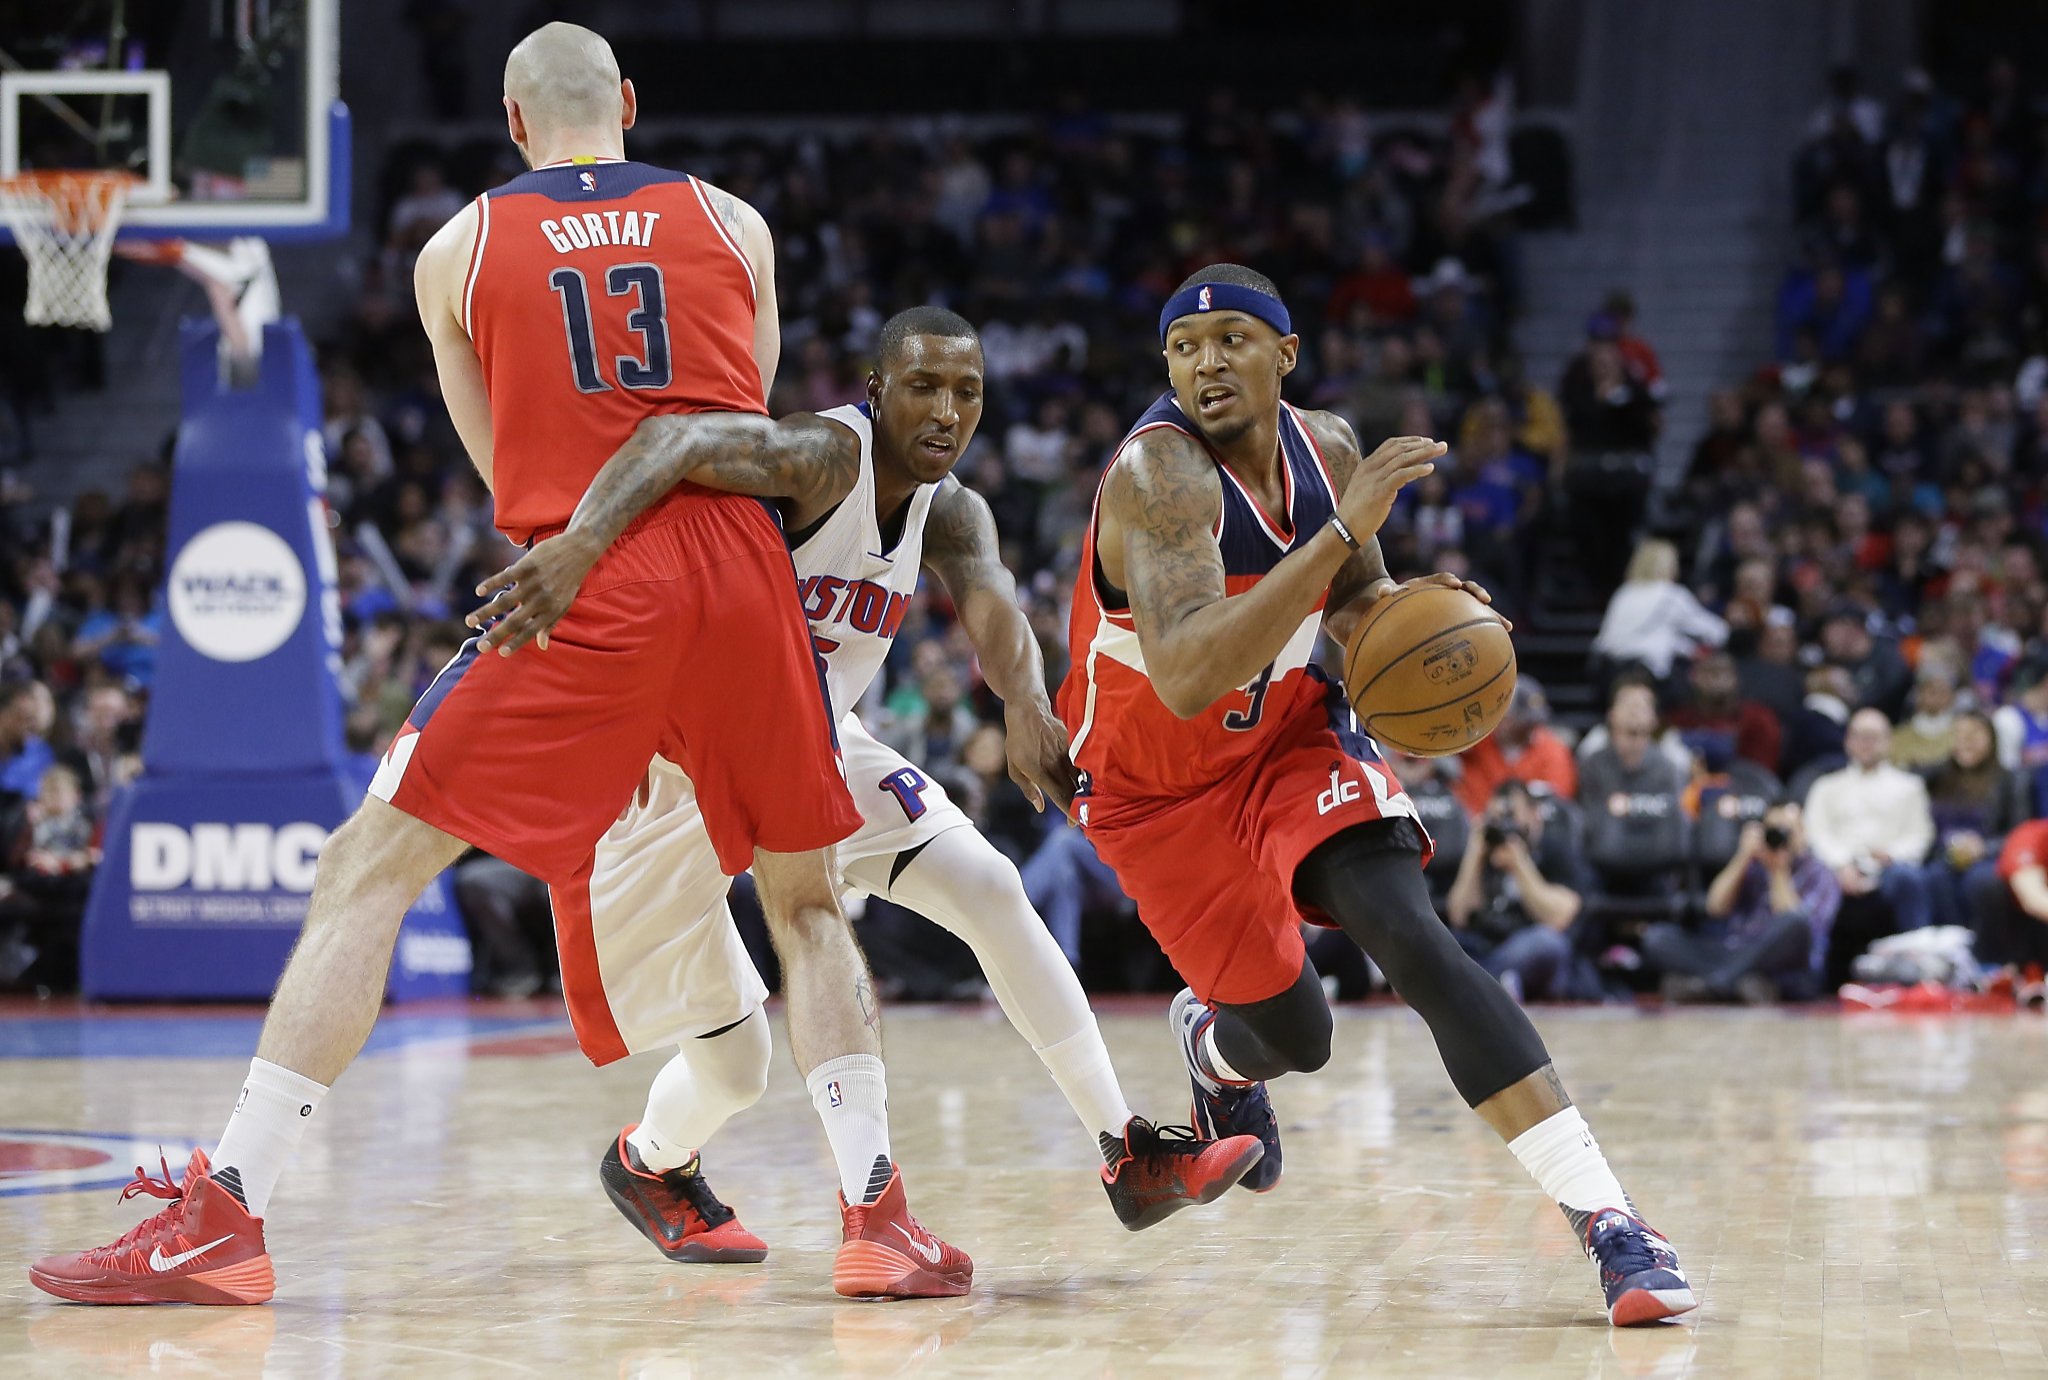 Bradley Beal will to re-sign with Wizards for 5 years, $128 million 